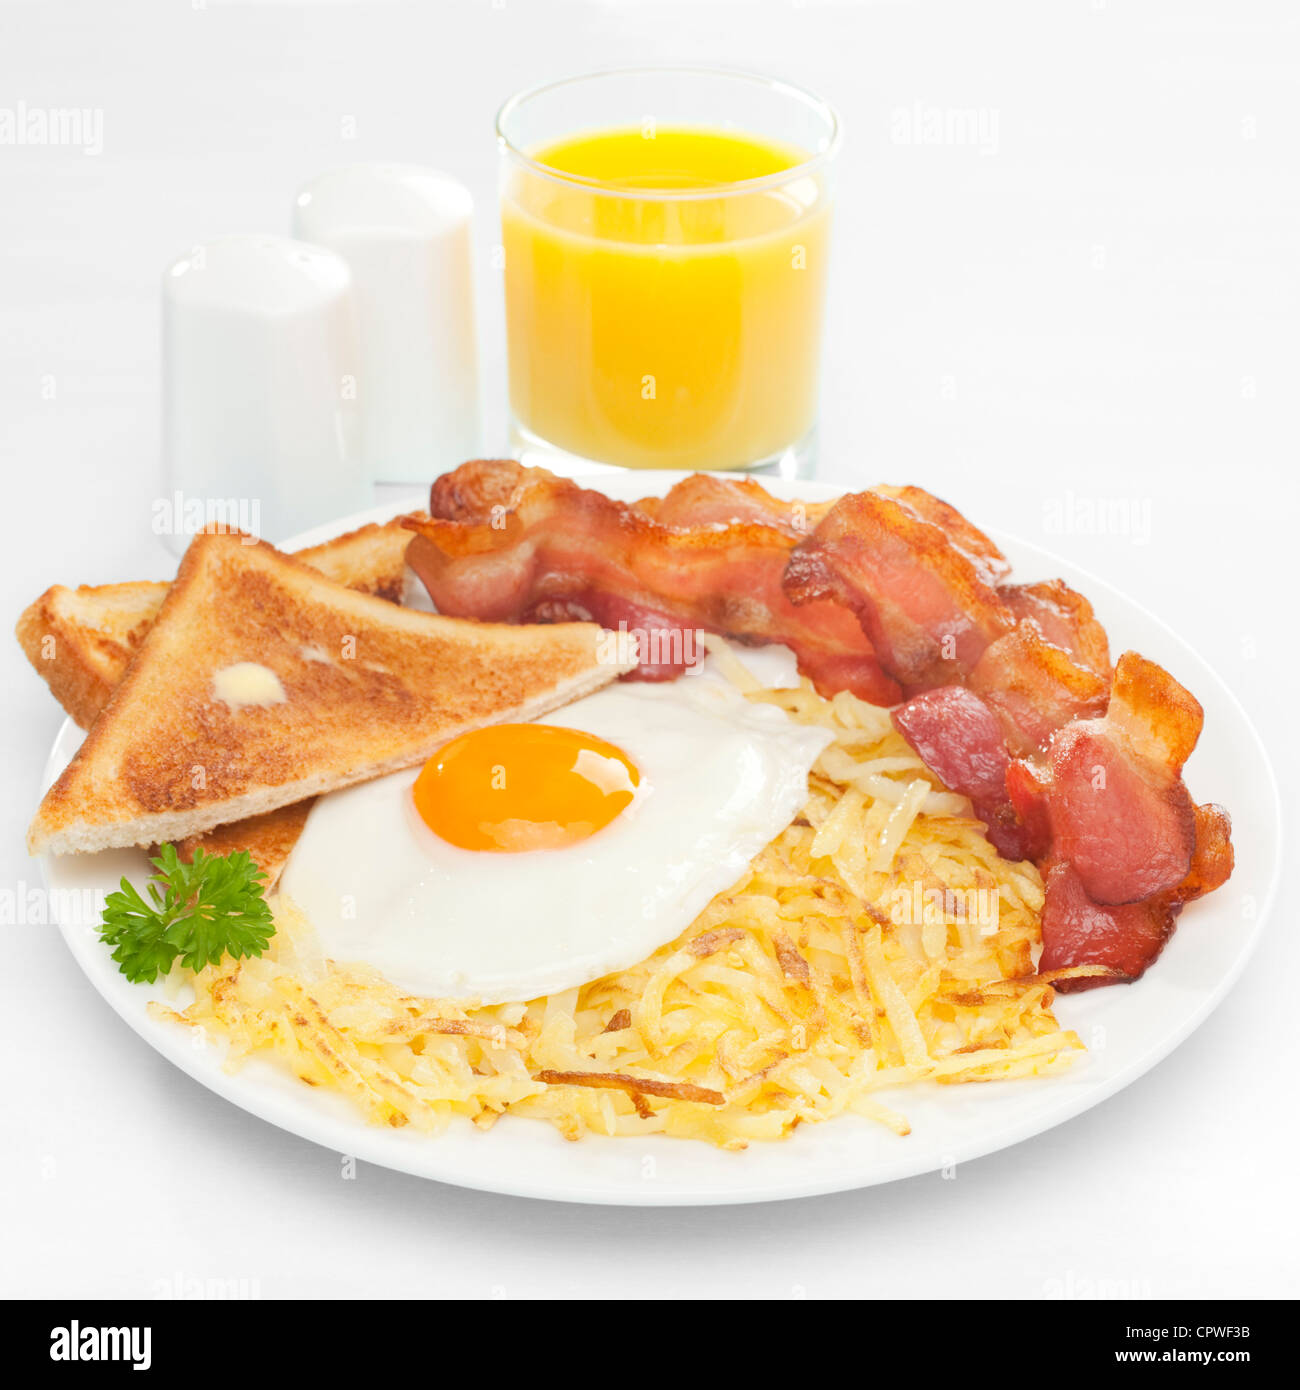 American breakfast with hash browns Stock Photo